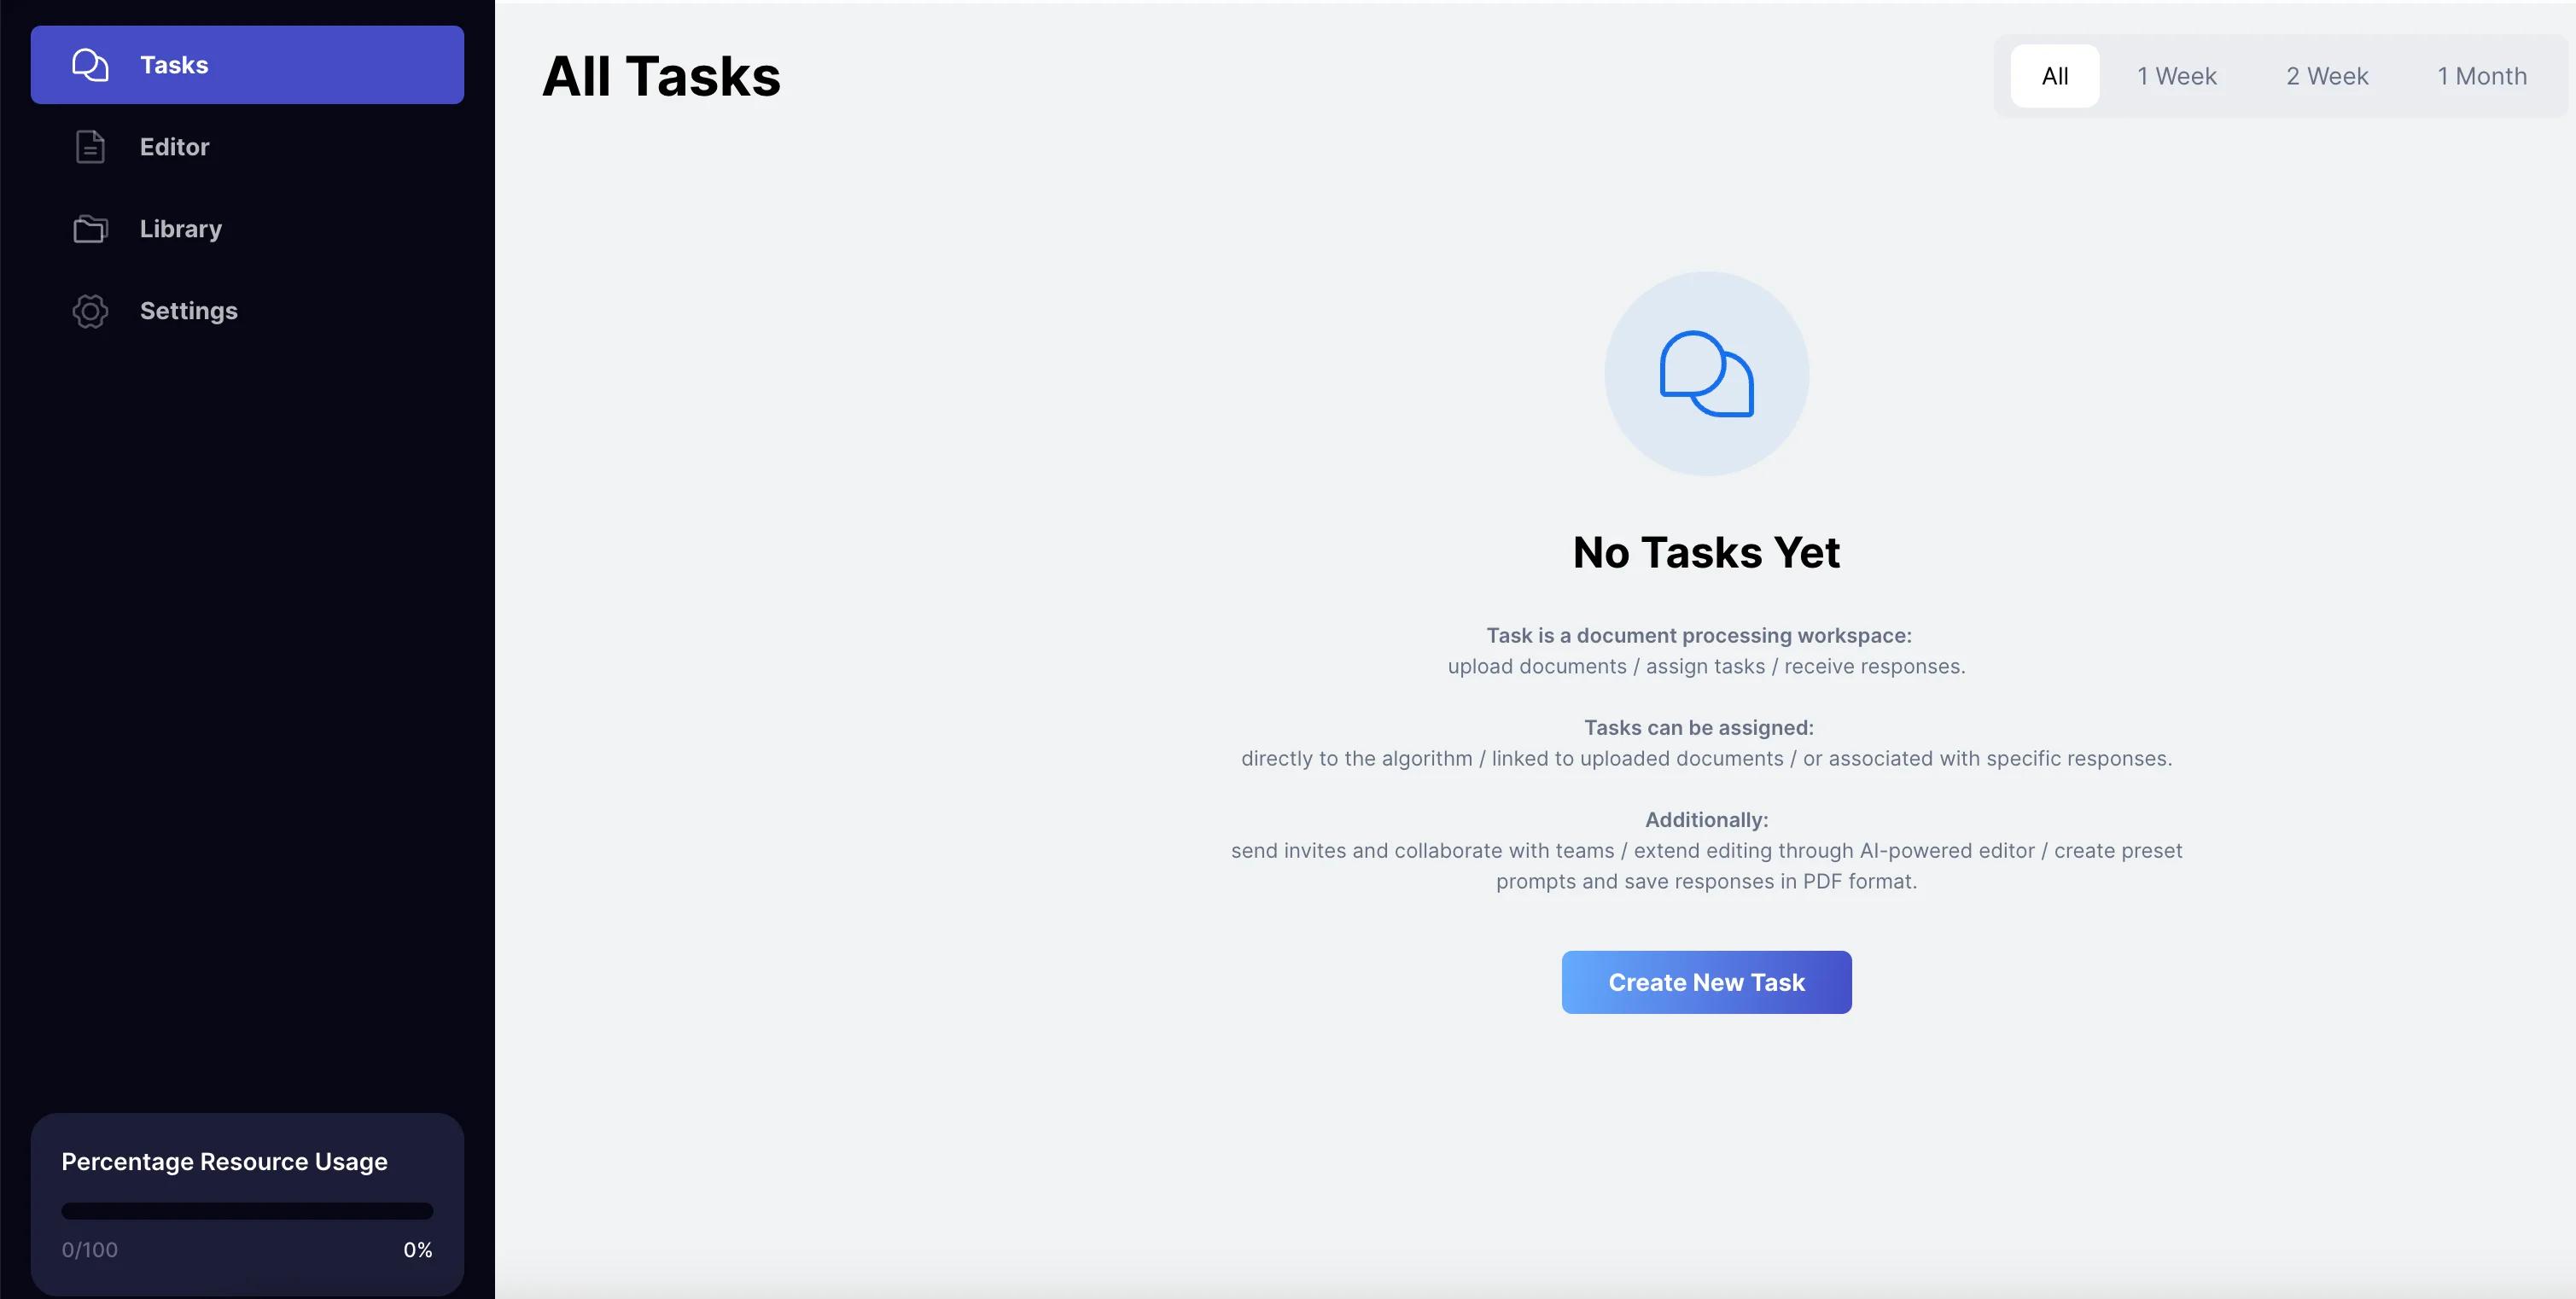 Example Image of tasks